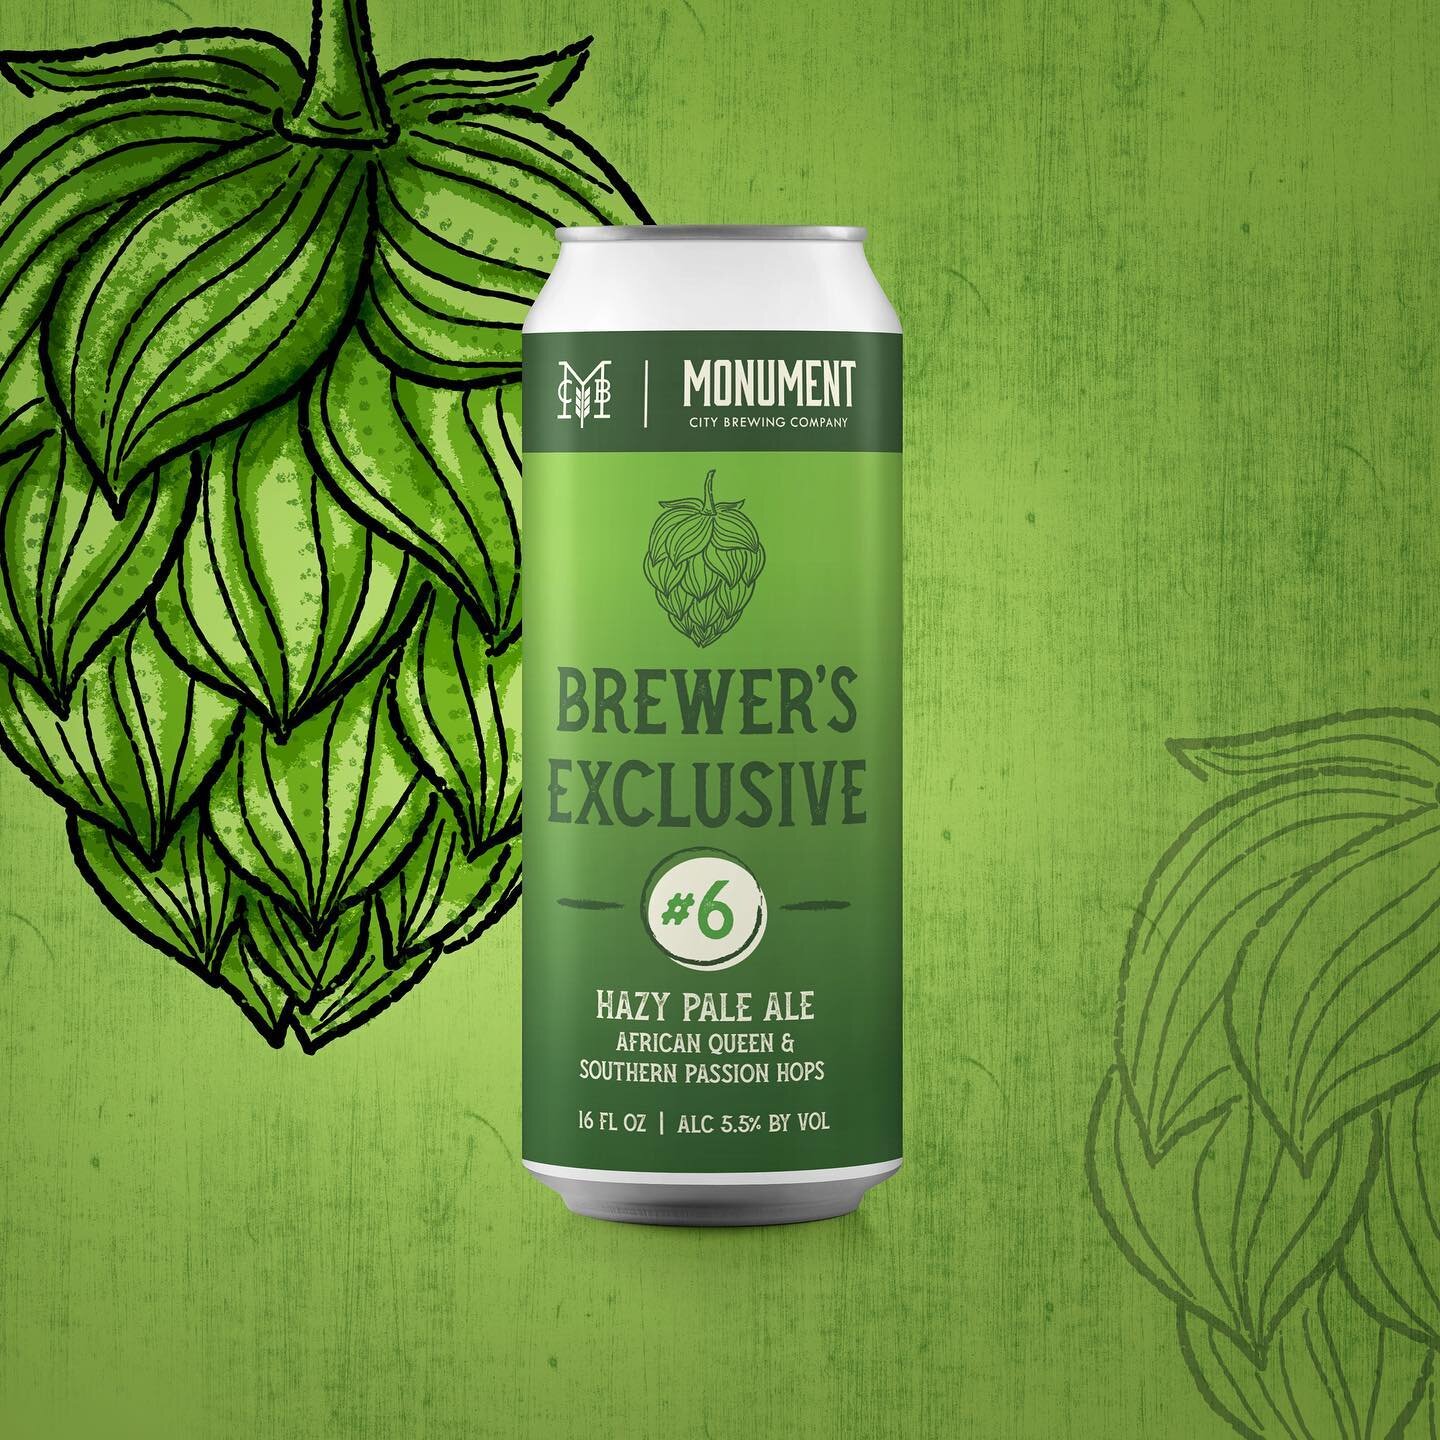 This was a fun one to design! 💚Introducing @monumentcitybrewing Brewers Exclusive #6. This 5.5% Hazy Pale Ale is made with African Queen and Southern Passion hops. This one pairs well with that summer heat. ☀️🍻

Illustration designed in @procreate 